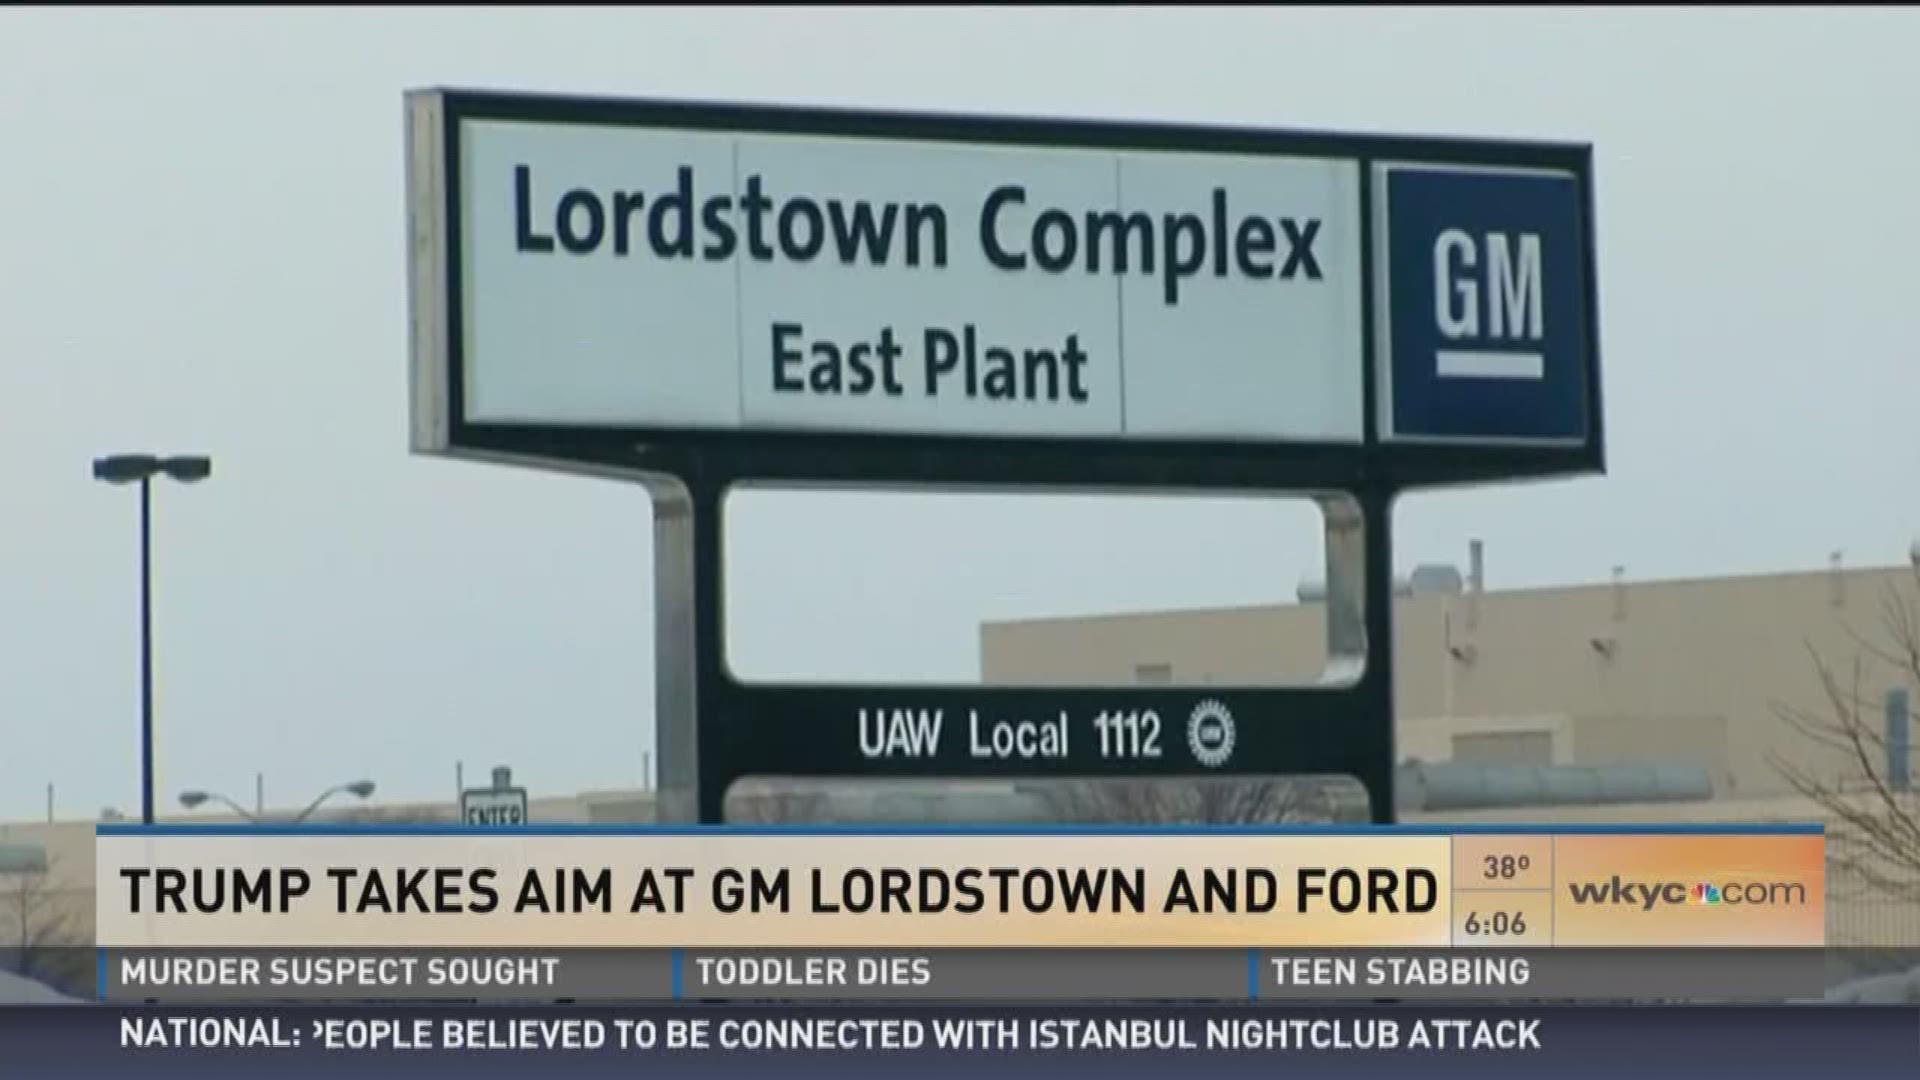 Trump takes aim at GM Lordstown and Ford - Maureen Kyle